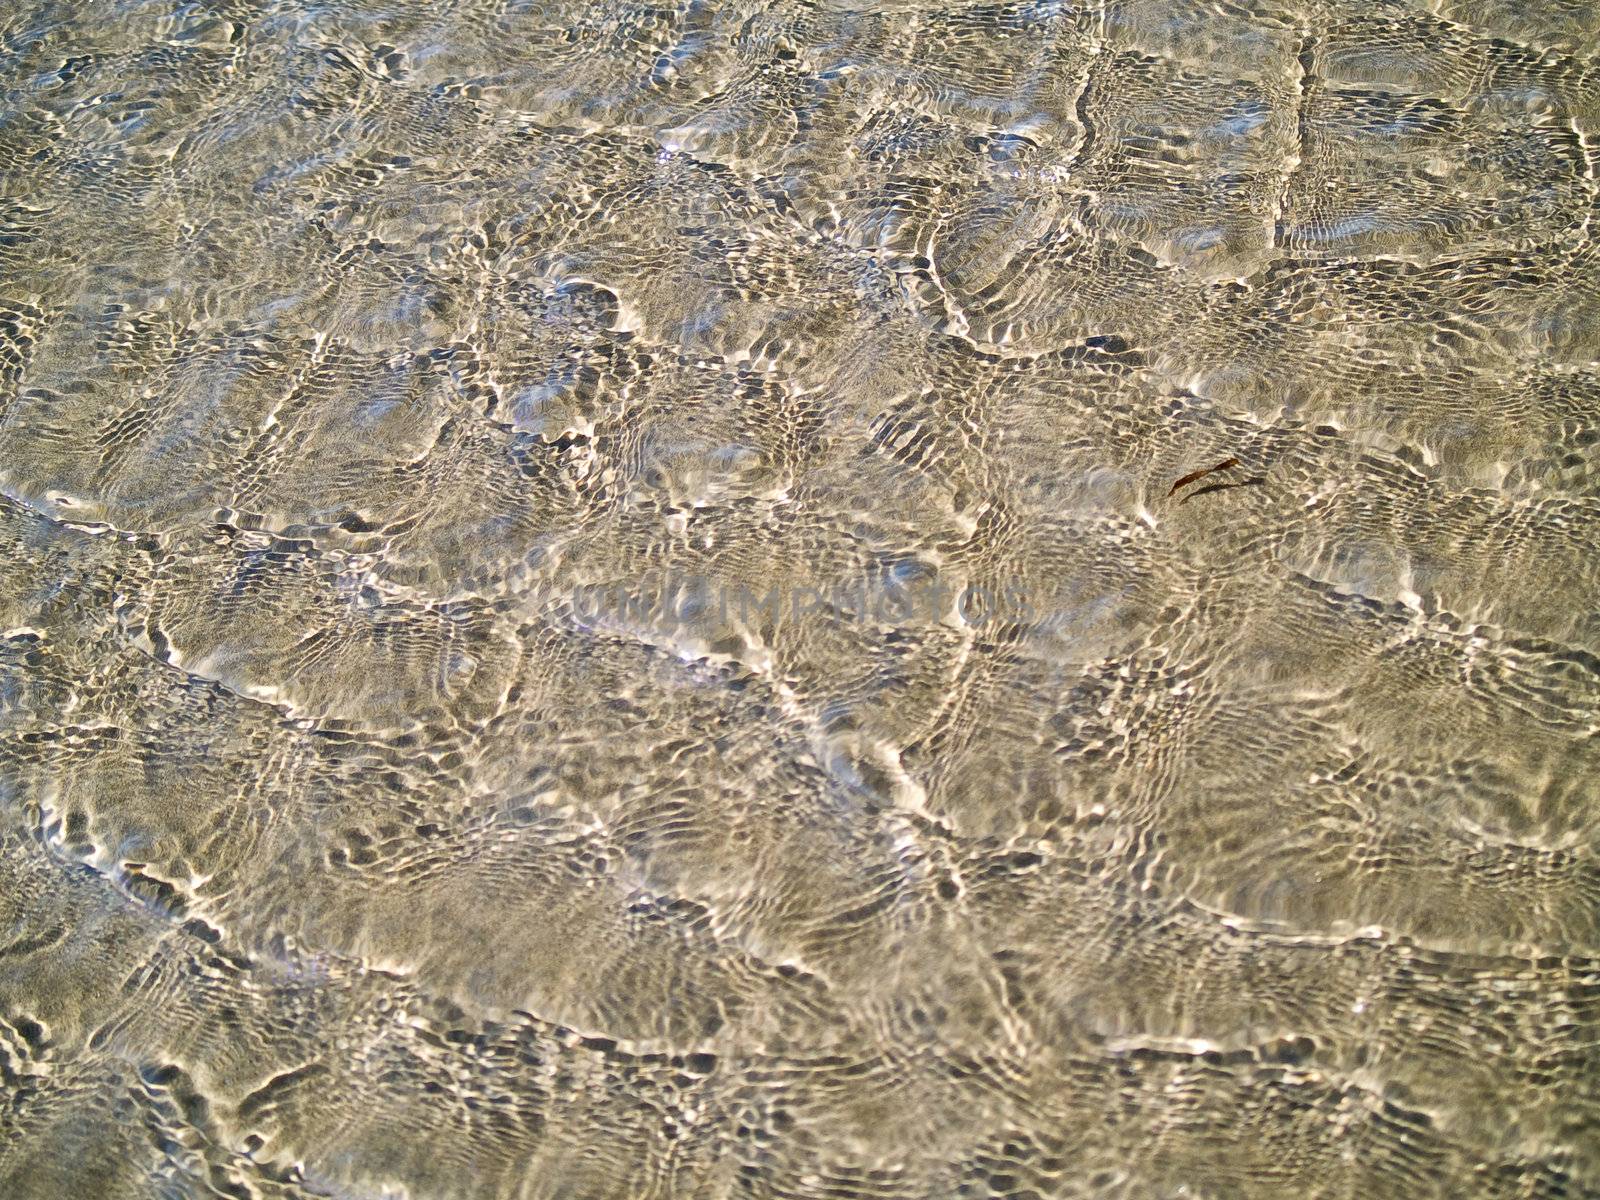 Ocean Ripples in Shallow Water on a Beach by Frankljunior